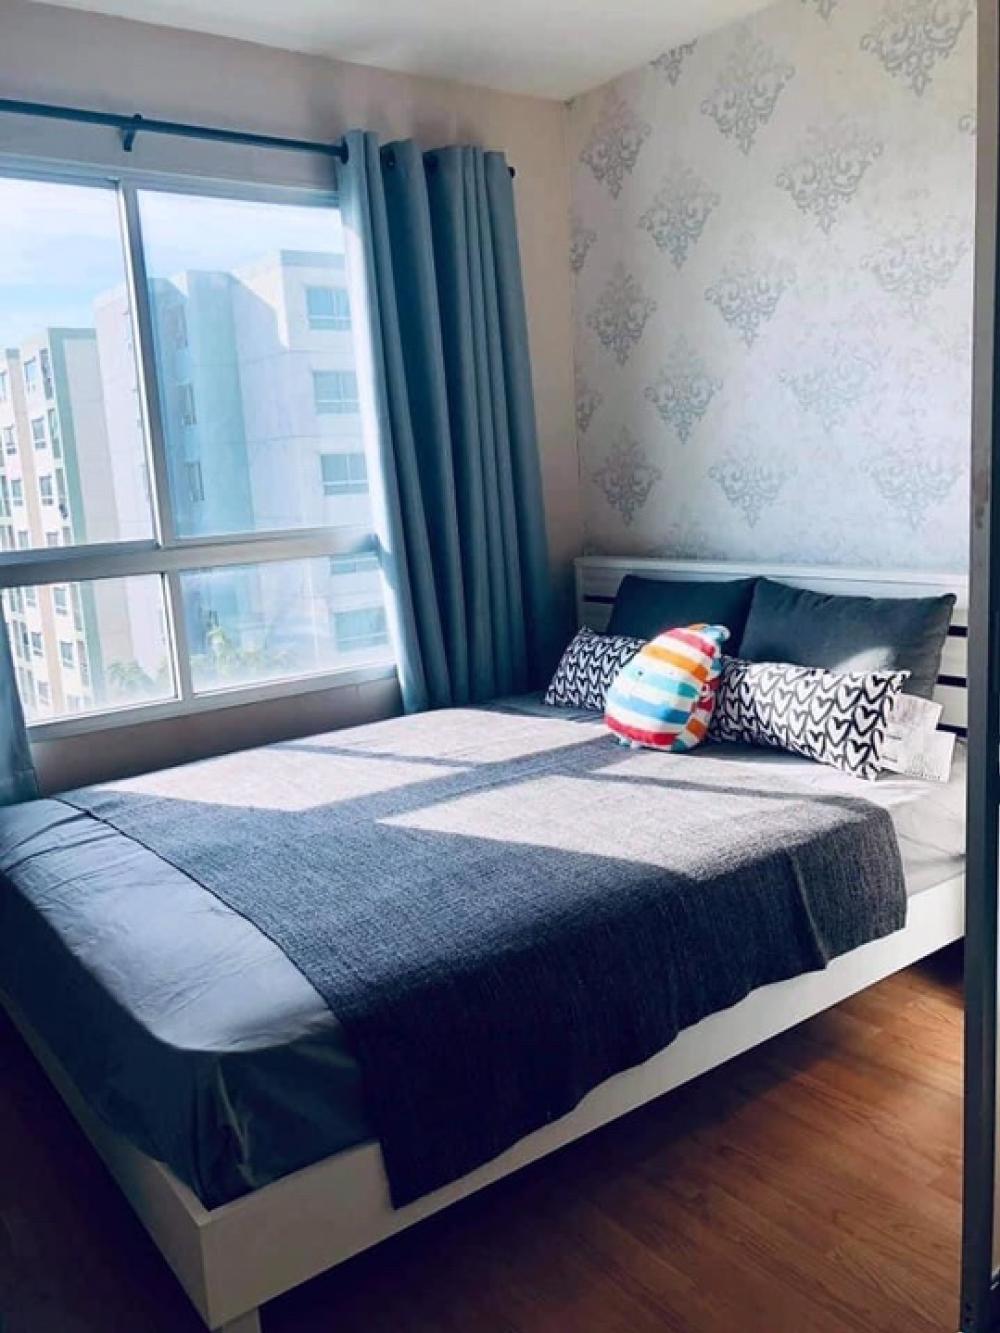 For RentCondoOnnut, Udomsuk : NC-R830 🎊 Lumpini Ville On Nut 46 for rent 🎊 Nice decorated room Install wallpaper throughout the room. Sweet and cool tones for only 6,500 baht/month! From normal price 7,000 baht 🎉This price is for direct contact customers only. Through the agent, ask f